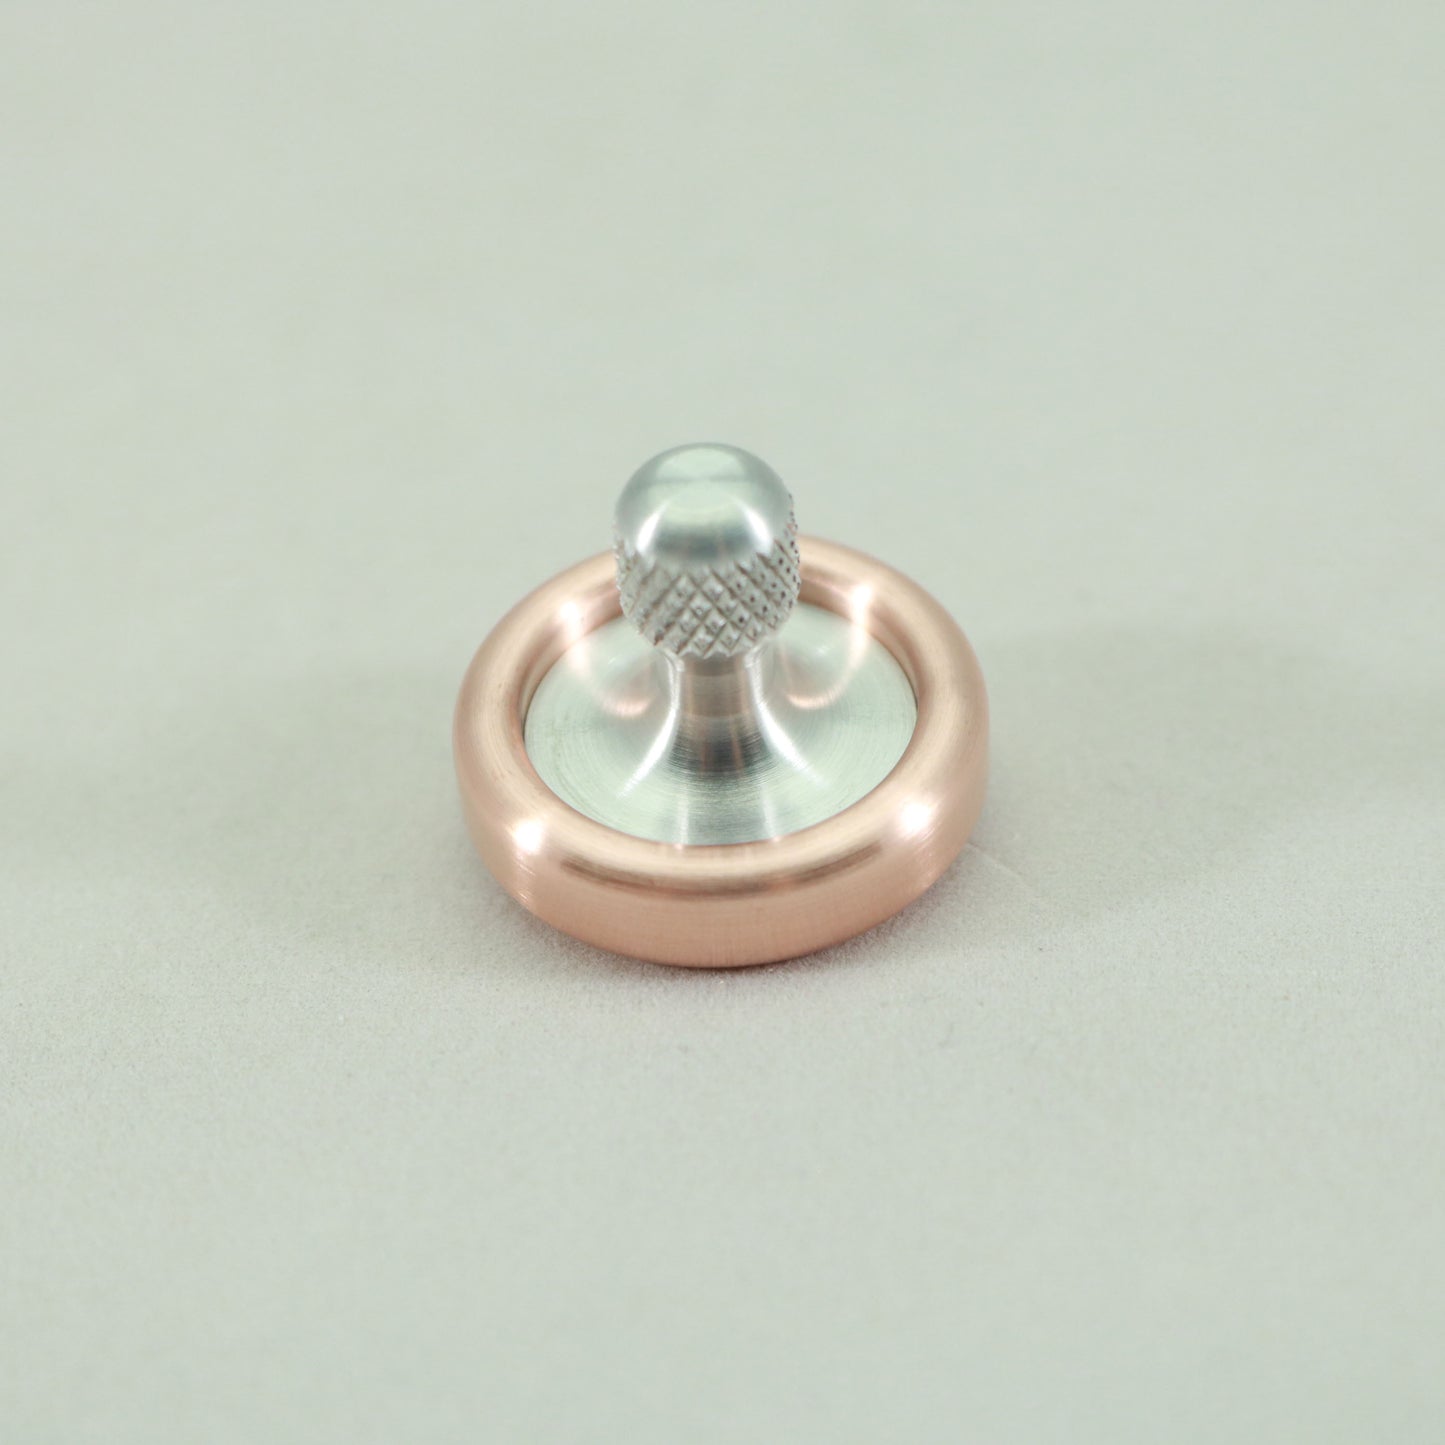 Top view of the Copper and Aluminum Dynamini spinning top by Kemner Design